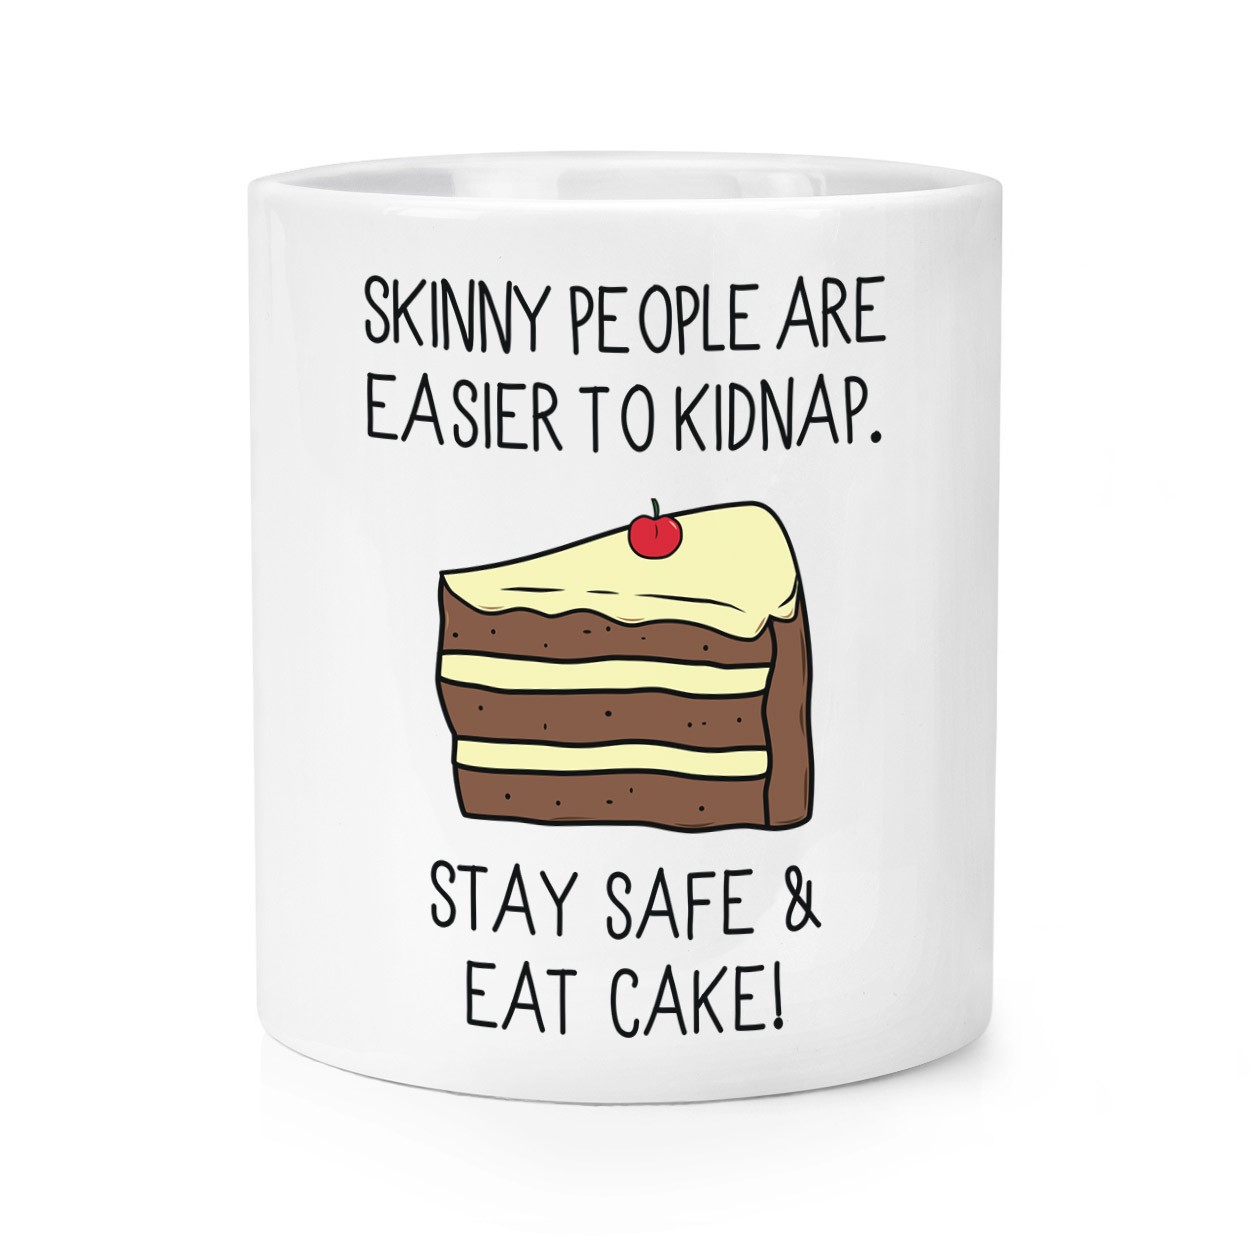 Skinny People Are Easier To Kidnap Stay Safe & Eat Cake Makeup Brush Pencil Pot